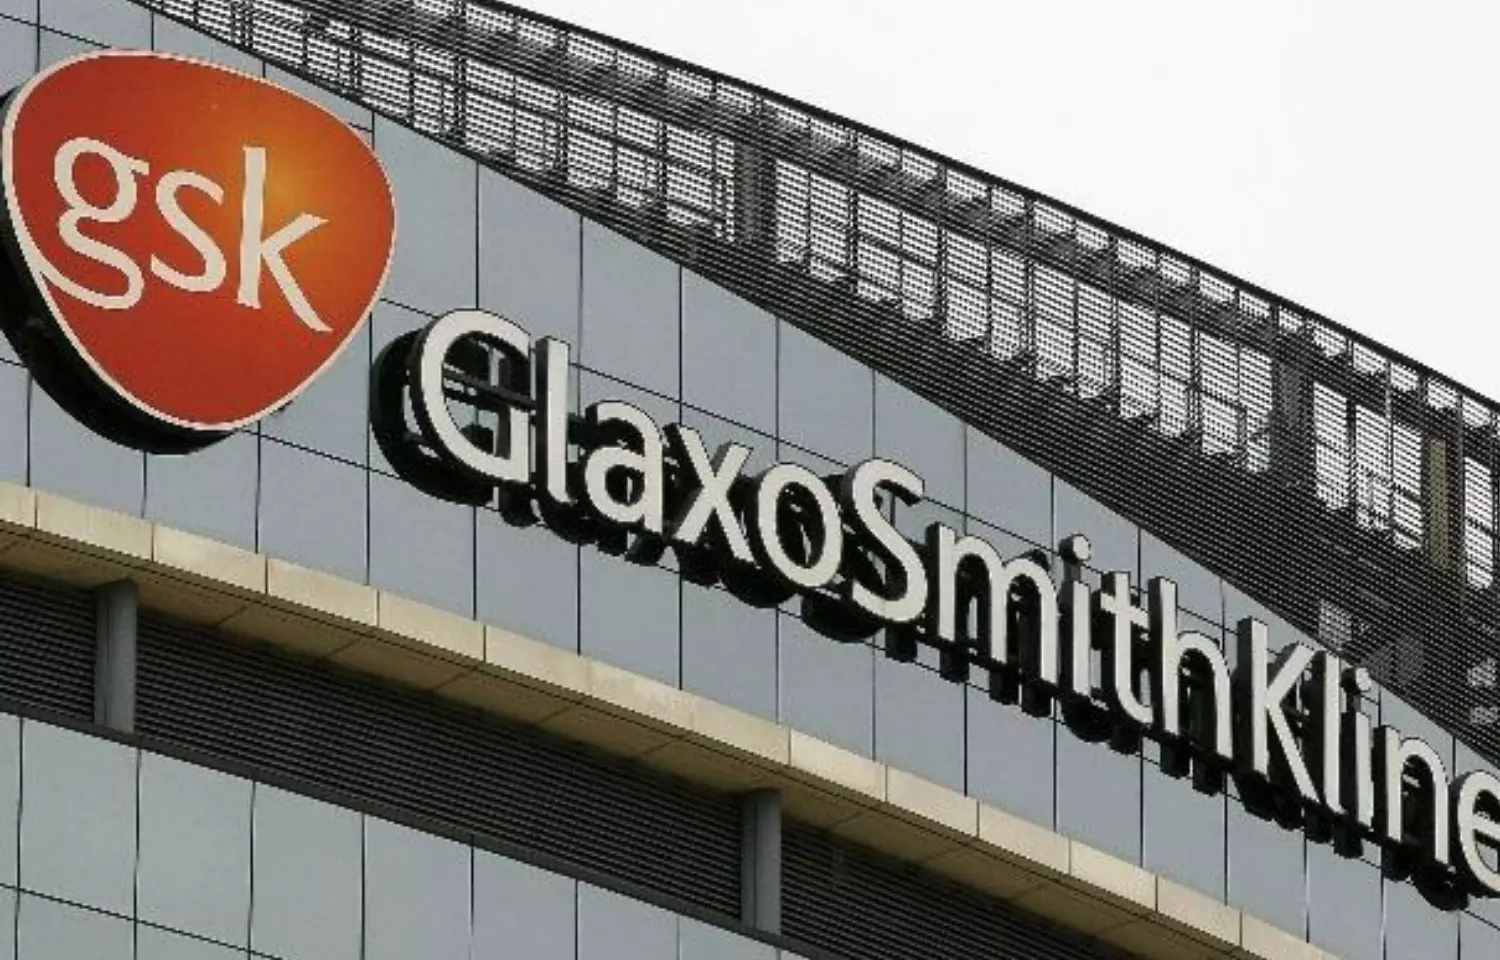 Setback: GSK proposal to market Meningococcal group B Vaccine rejected by CDSCO panel